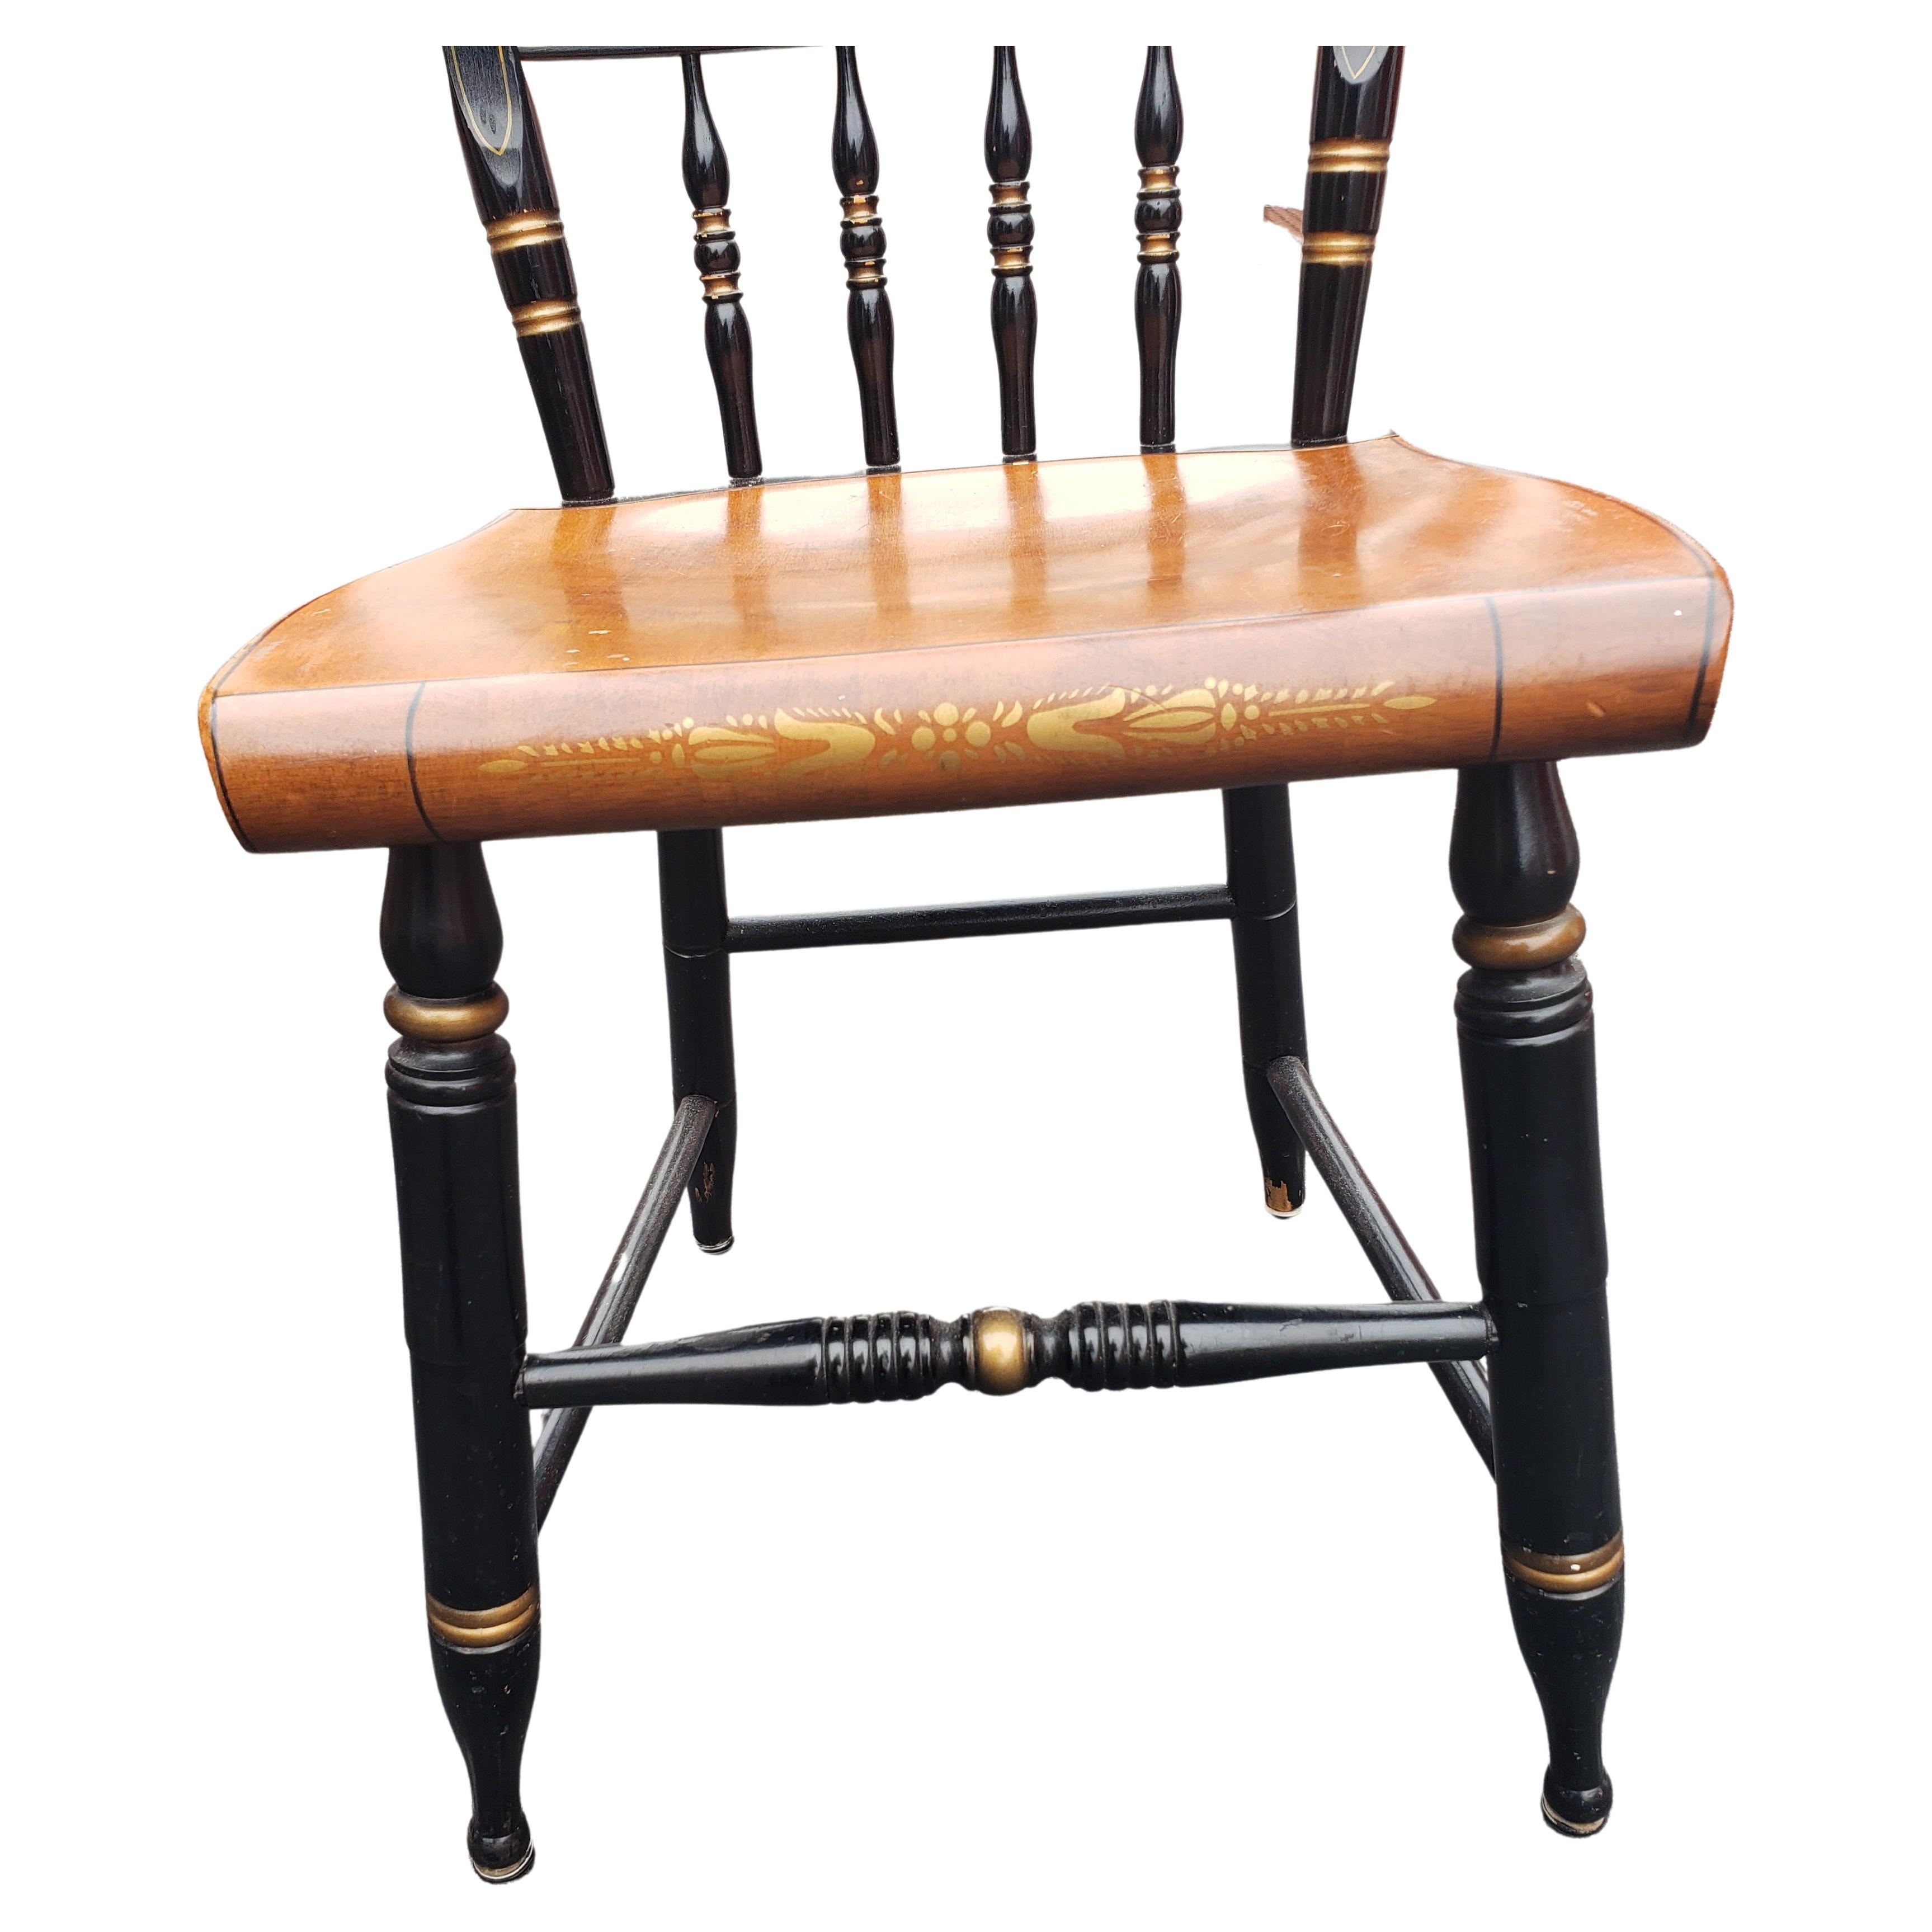 American Lambert Hitchcock Stenciled Ornate Ladder Spindle Back Side Chairs, a Pair